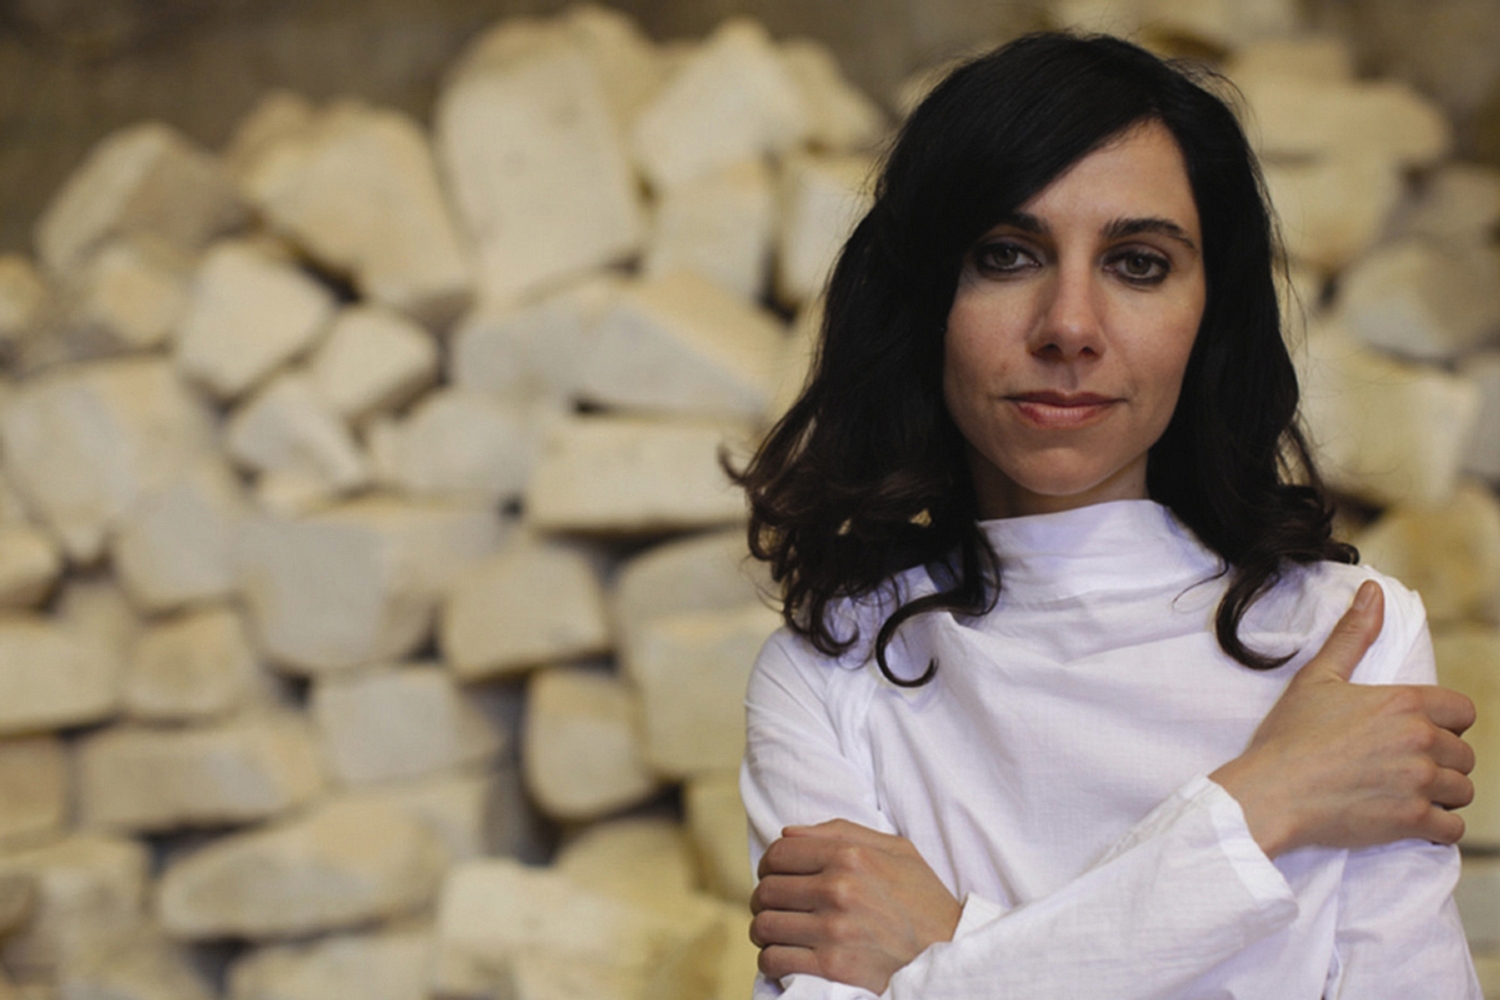 Hear PJ Harvey cover Nick Cave and the Bad Seeds’ ‘Red Right Hand’